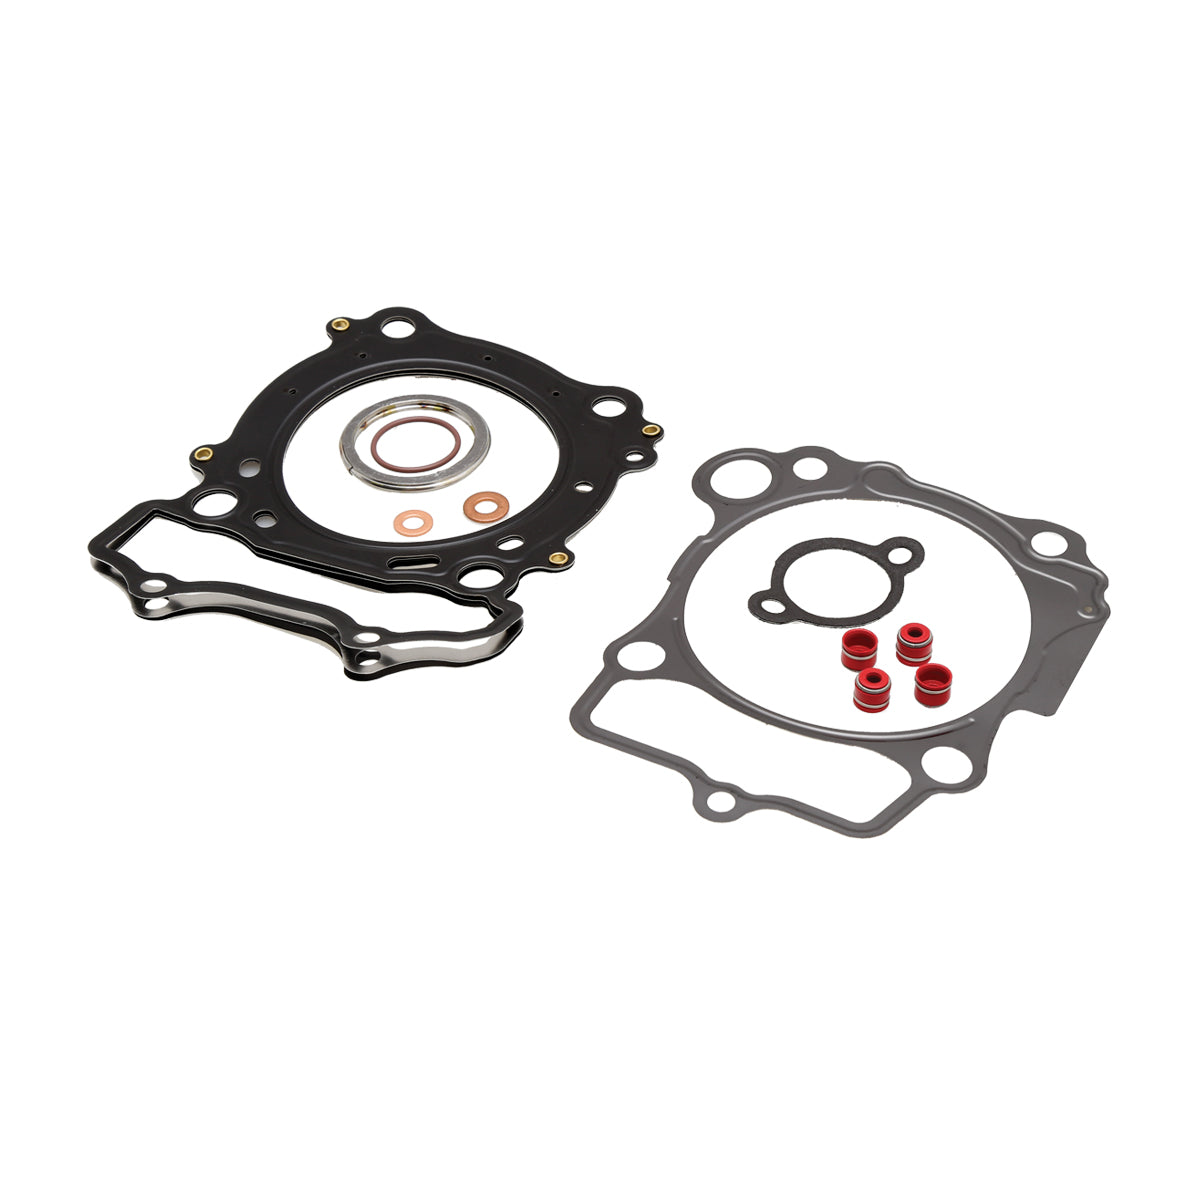 Gasket Kit, Replacement, Cometic, Yamaha®, WR™ / YZ™ 250F, 2014-2016